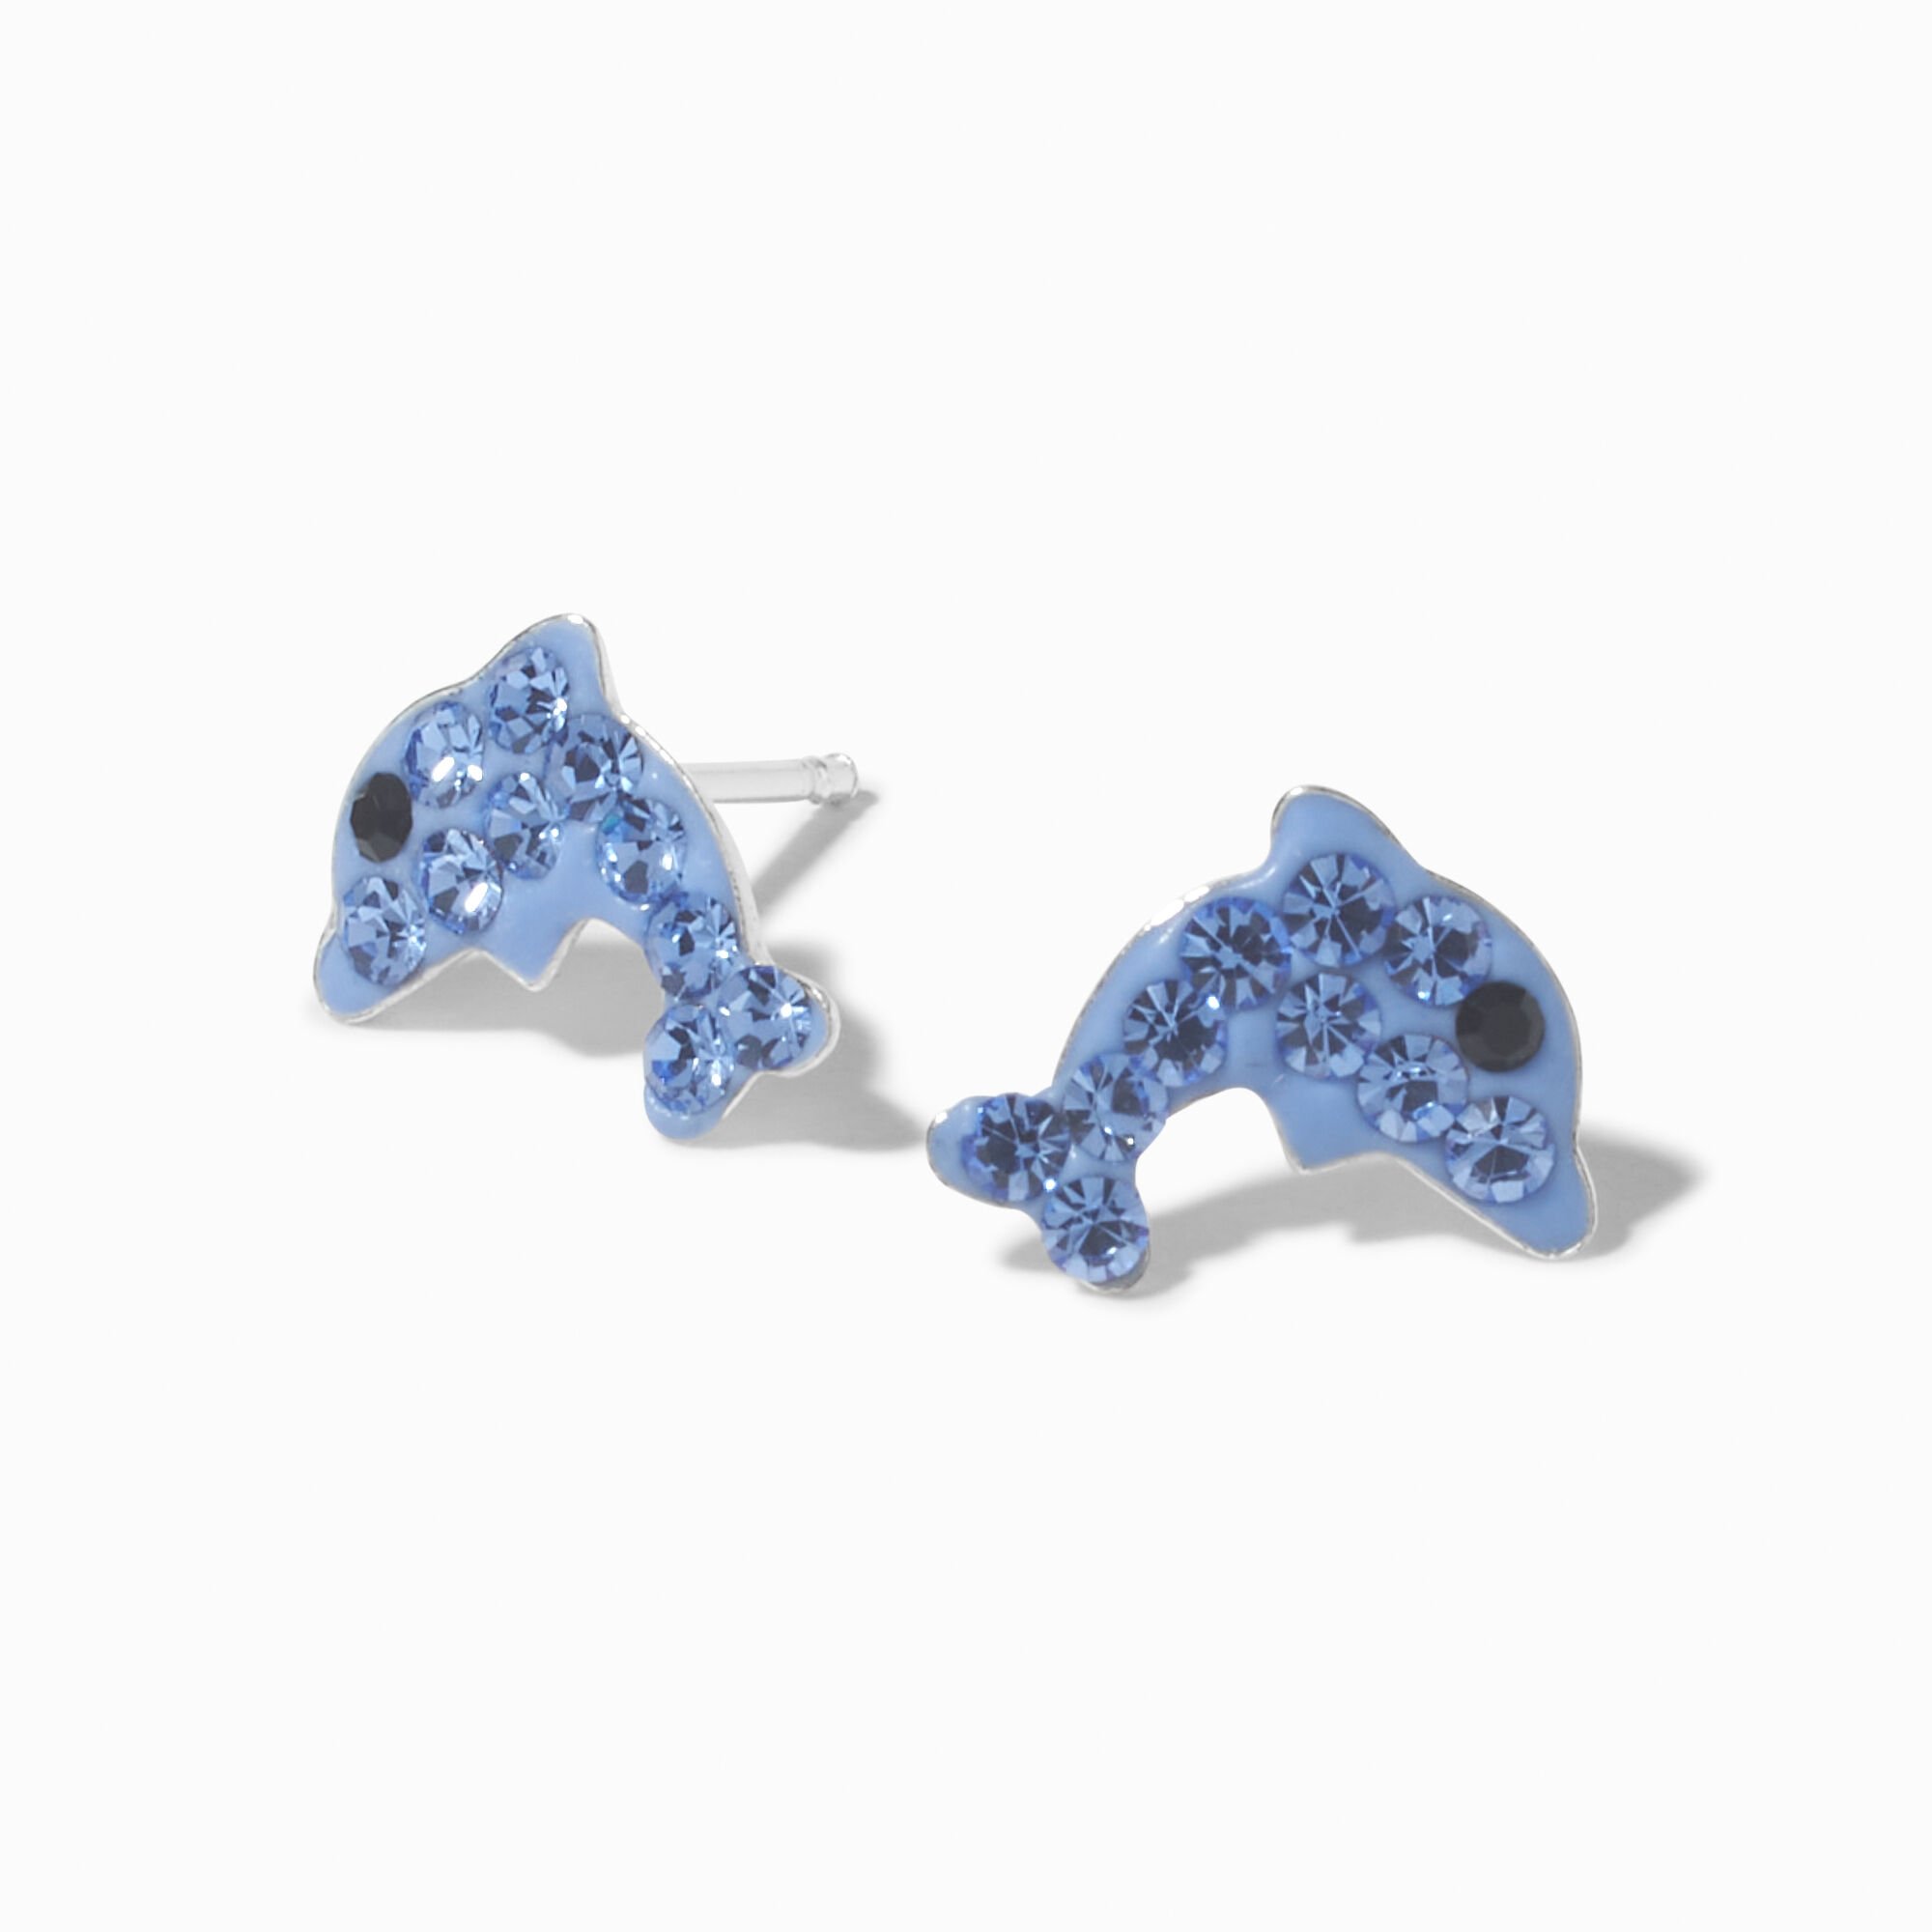 View Claires Crystal Dolphin Stud Earrings Silver information